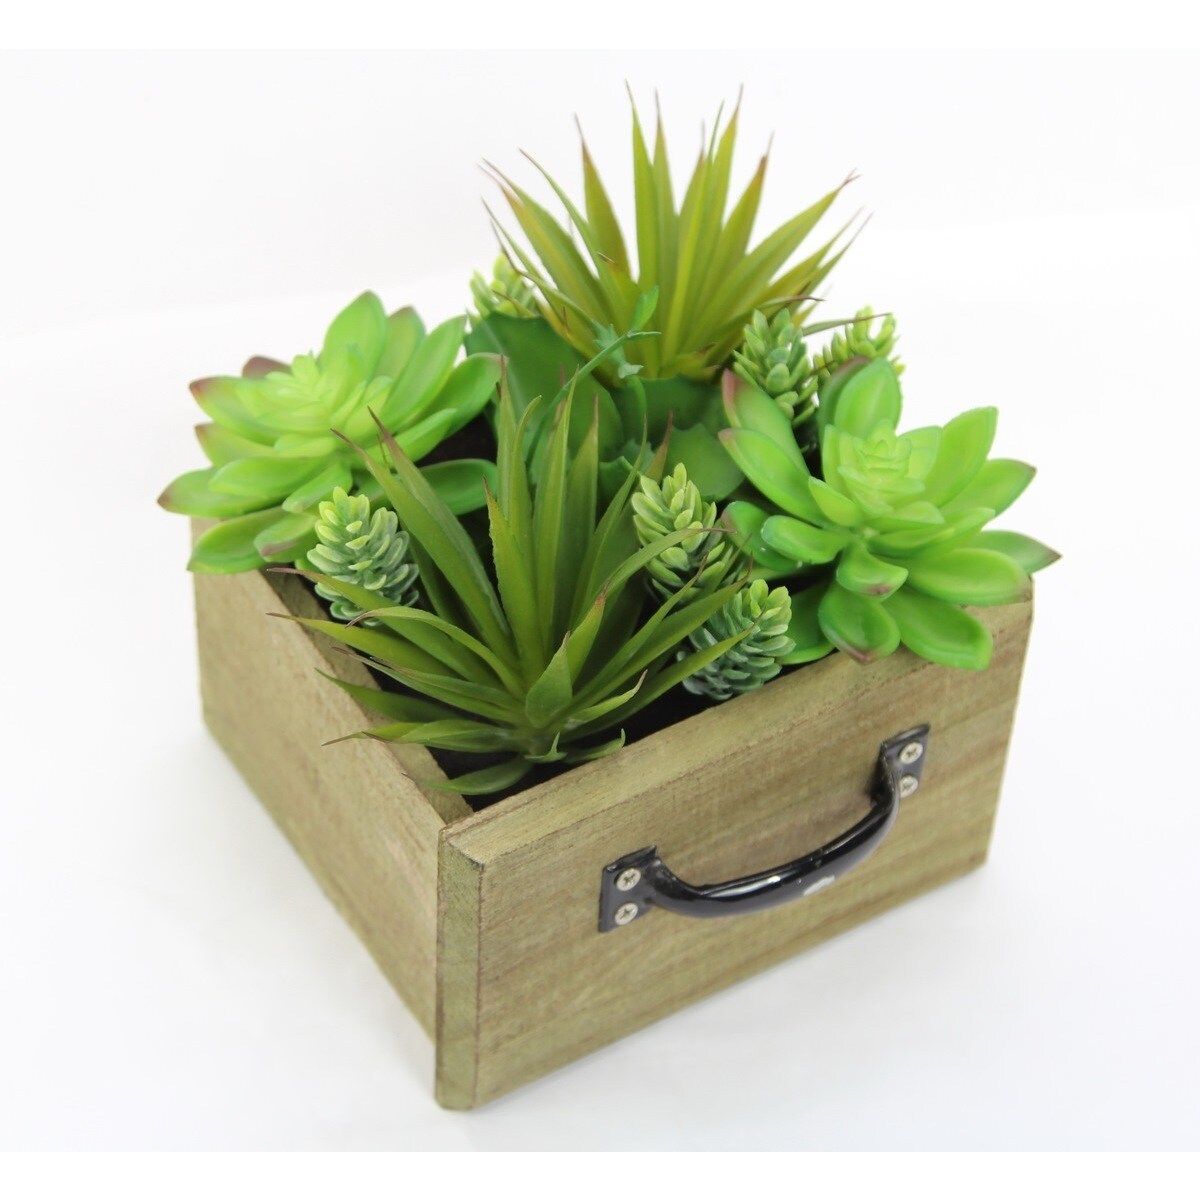 Artificial Desktop Potted Succulents Plants With Wood Planter, Green For  Home Office Dundefinedcor, Gift and Arrangement Decoration - On Sale -  Overstock - 17126750